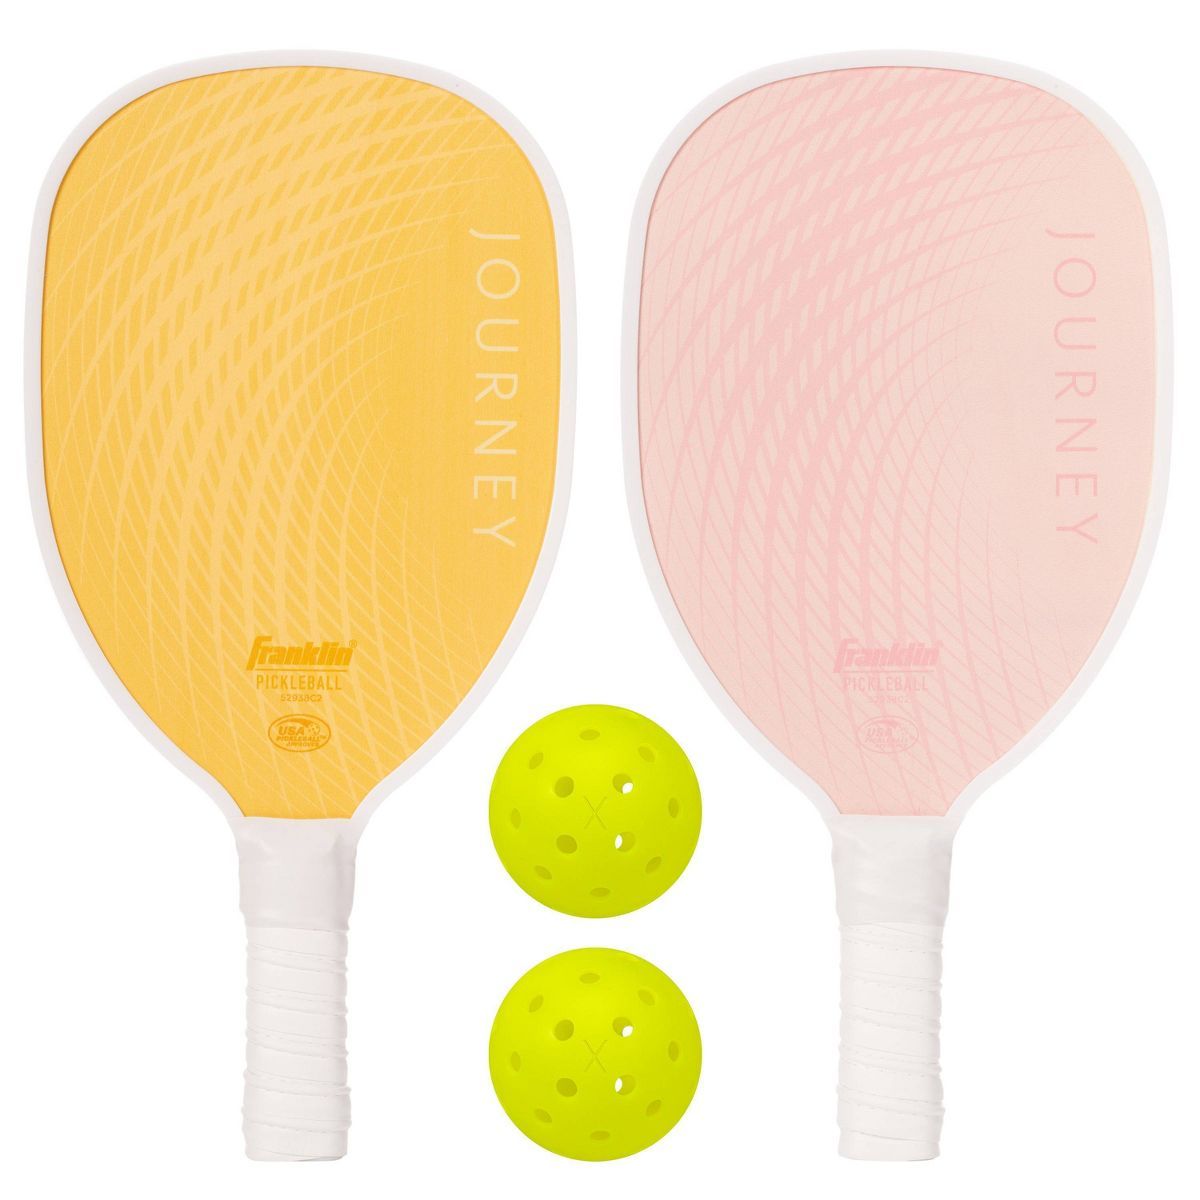 Franklin Sports 2 Player Wood Journey Pickleball Paddle and Ball Set in Mesh bag - Yellow/Pink | Target